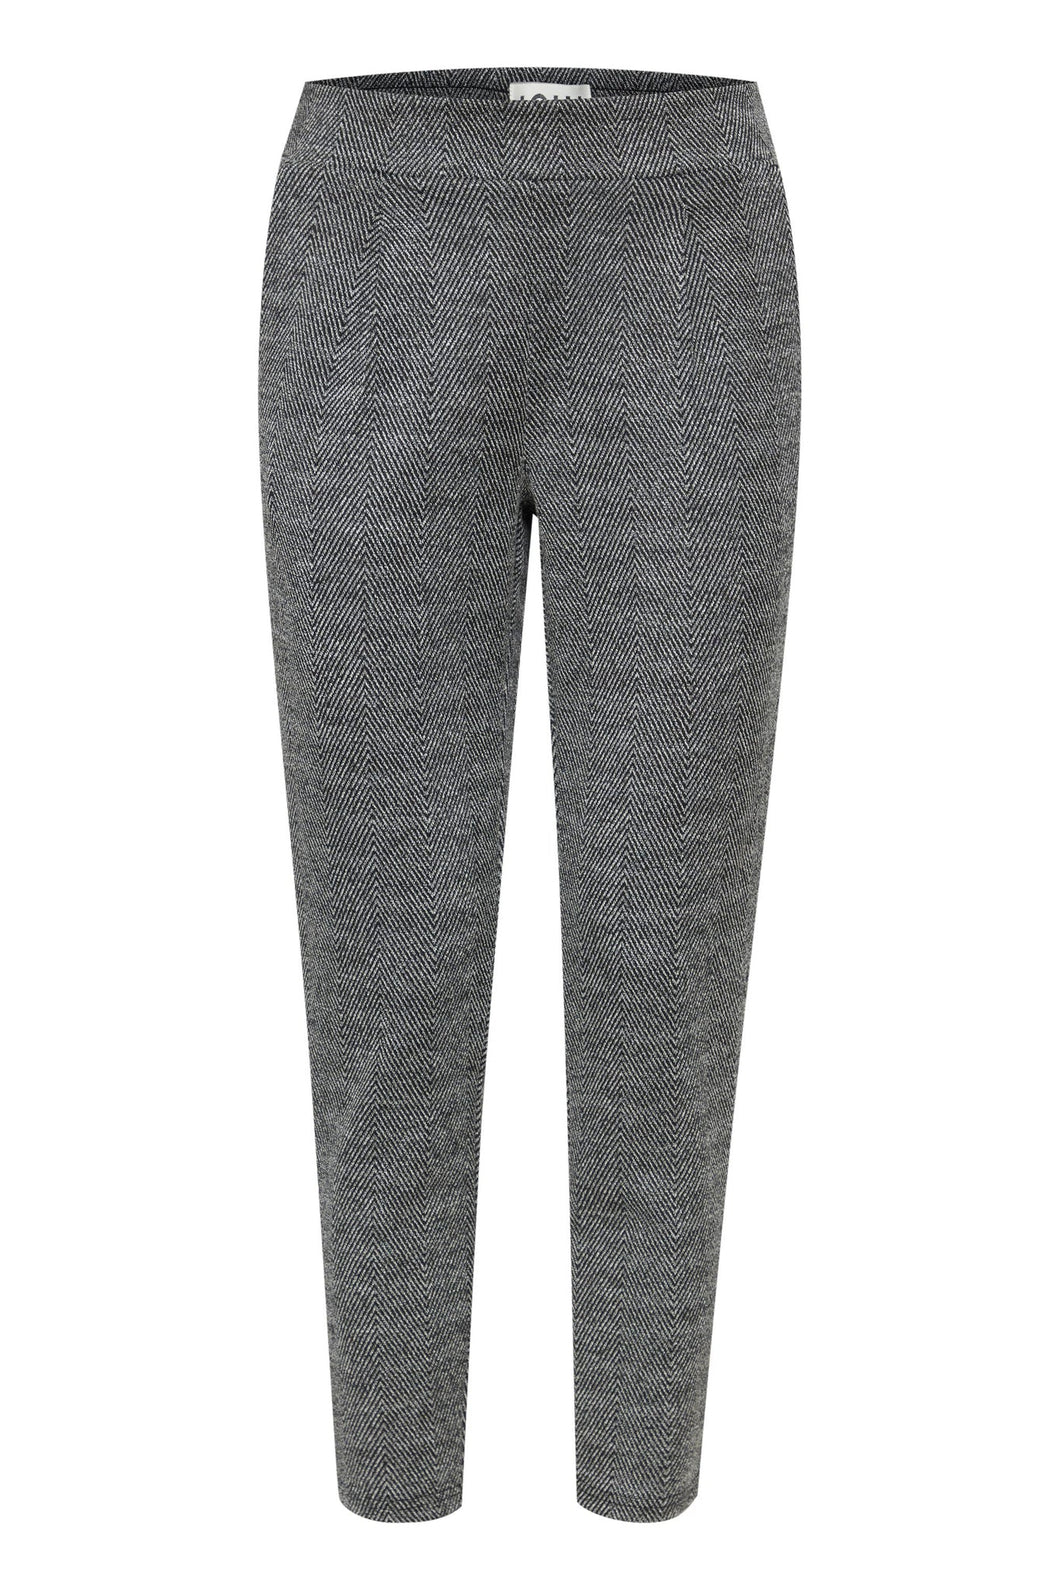 KATE STRUCTURE PANT